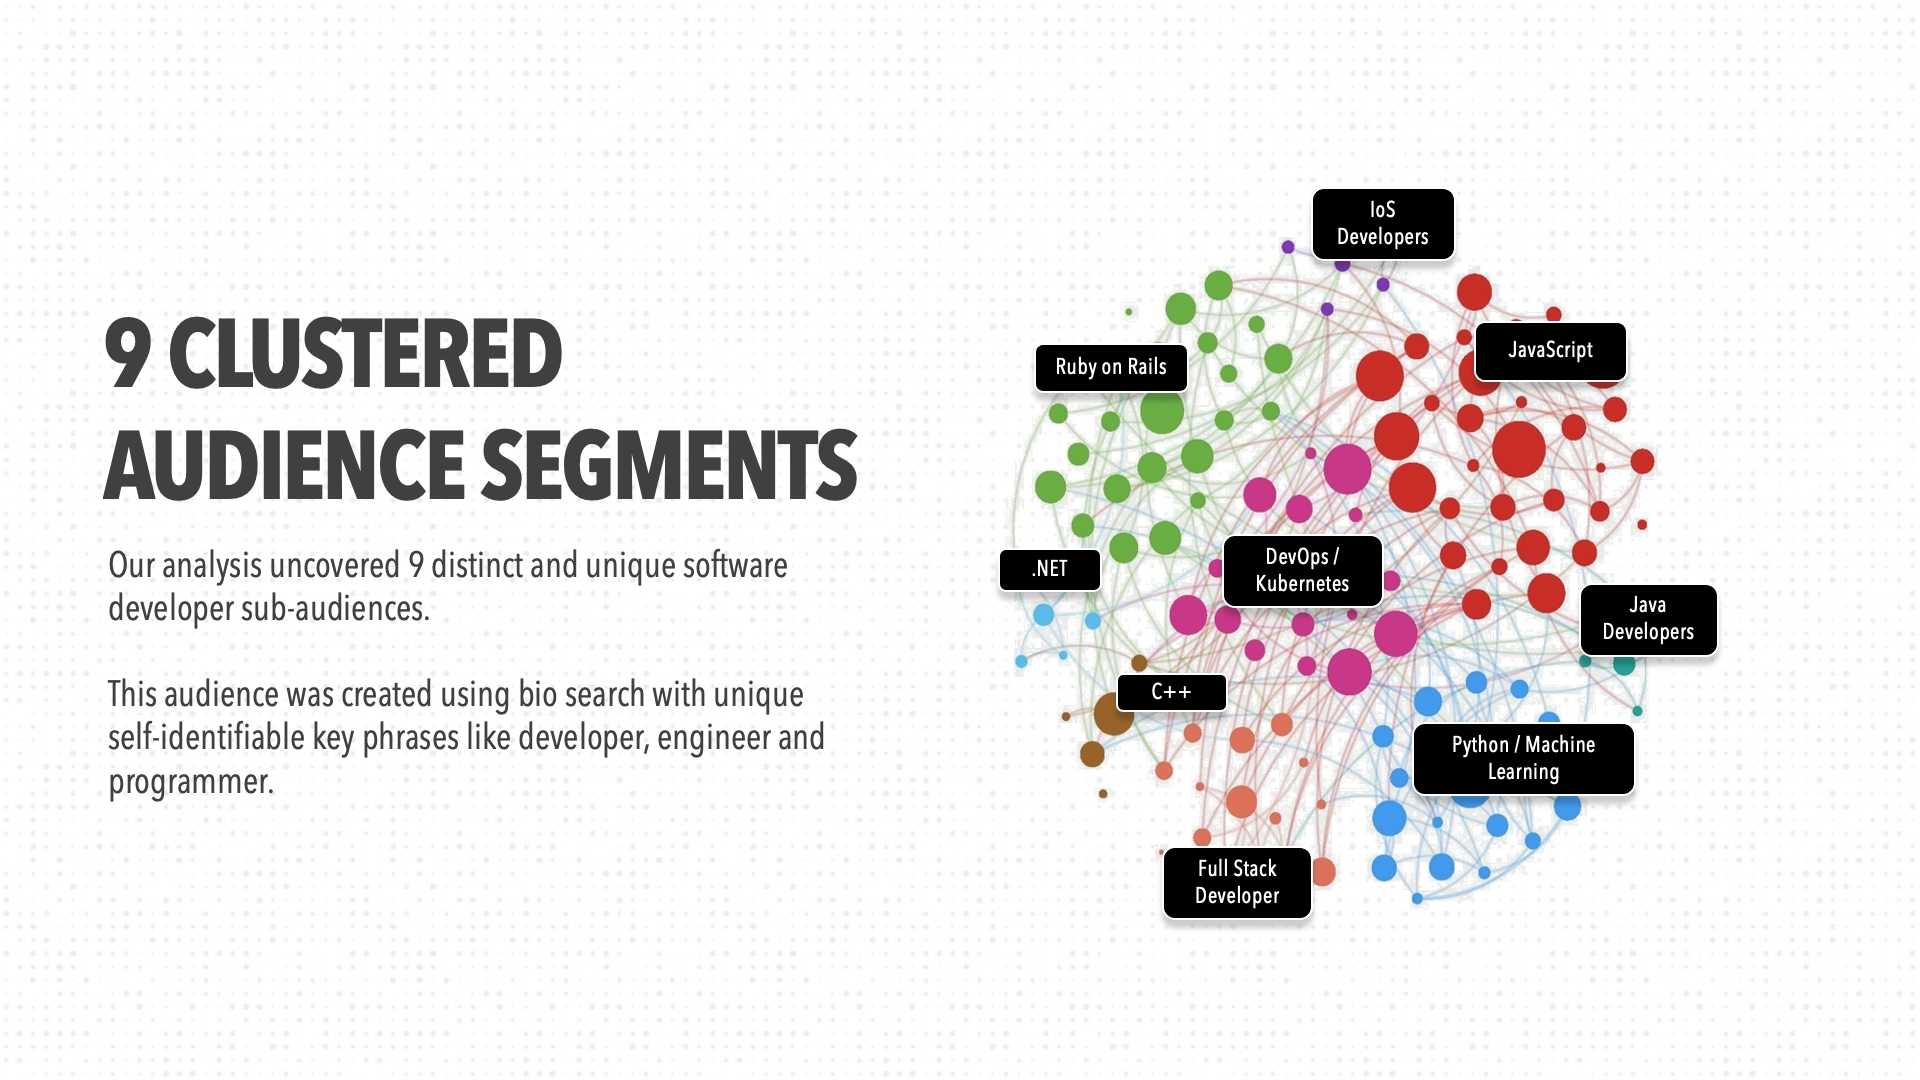 Audience analysis can provide clustered segments based on affinities.